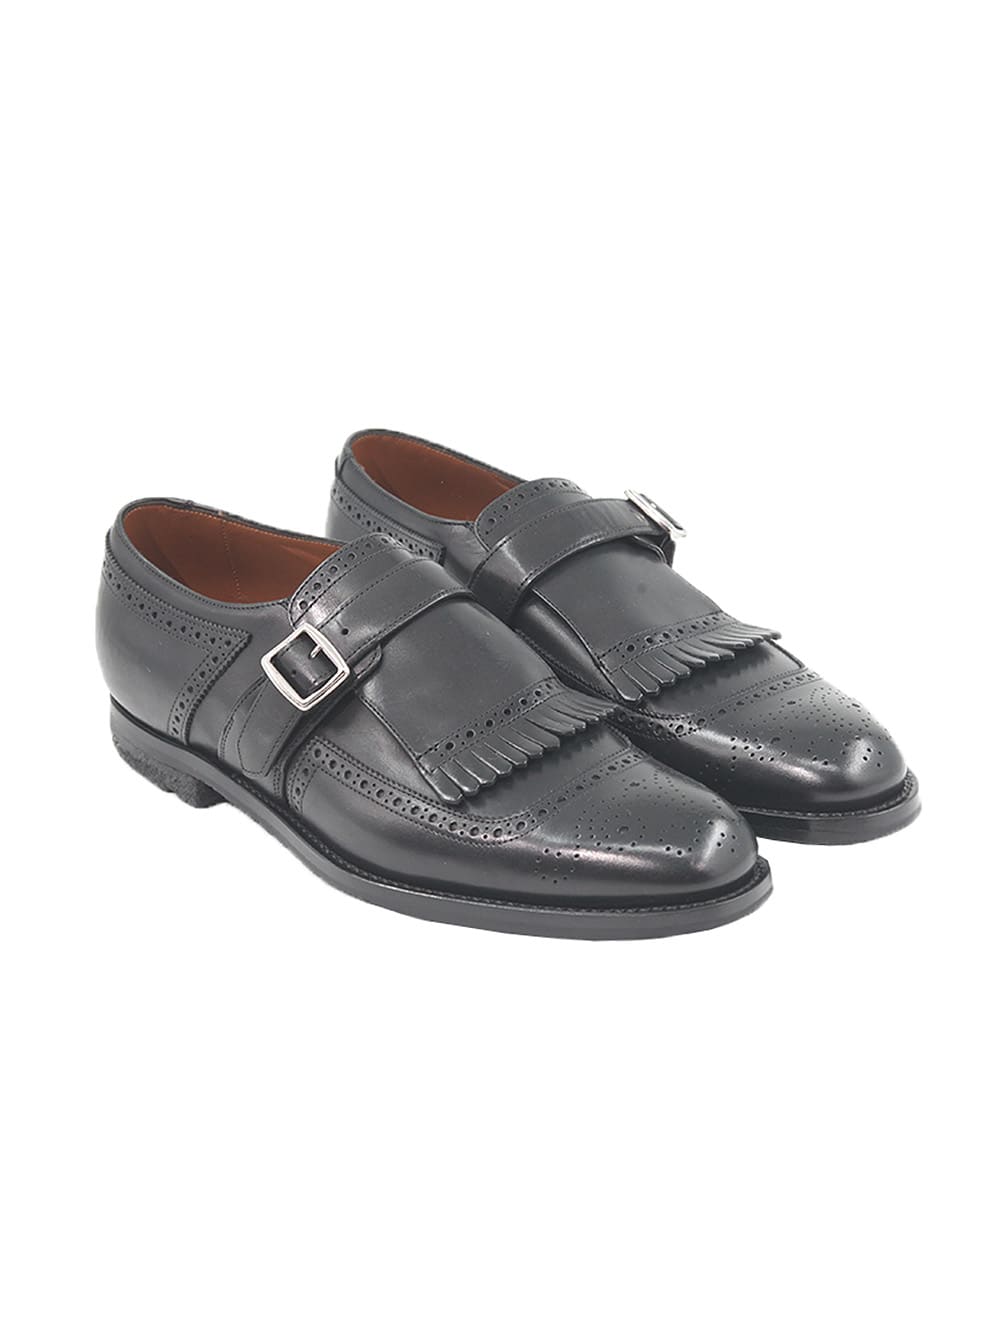 CHURCH'S MONK STRAP LOAFER IN CALF LEATHER